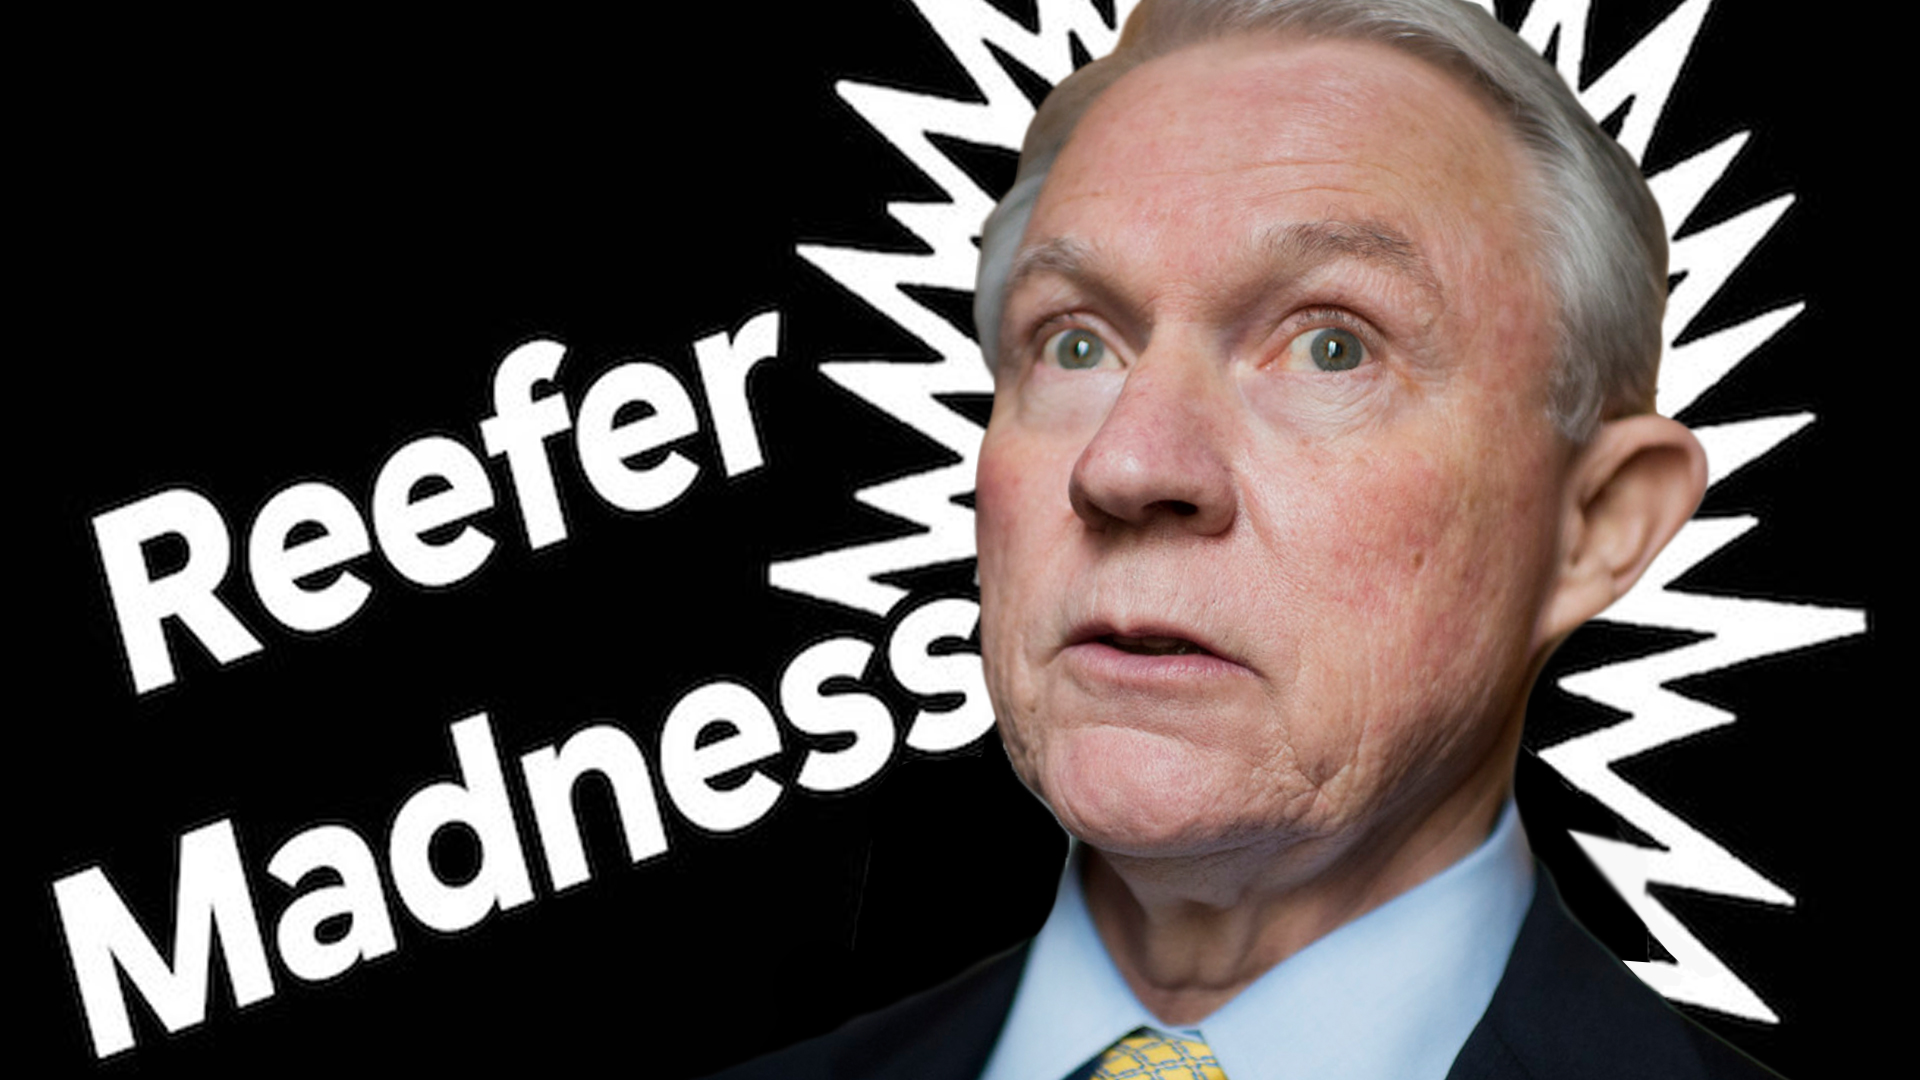 jeff-sessions-refeer-madness.jpg